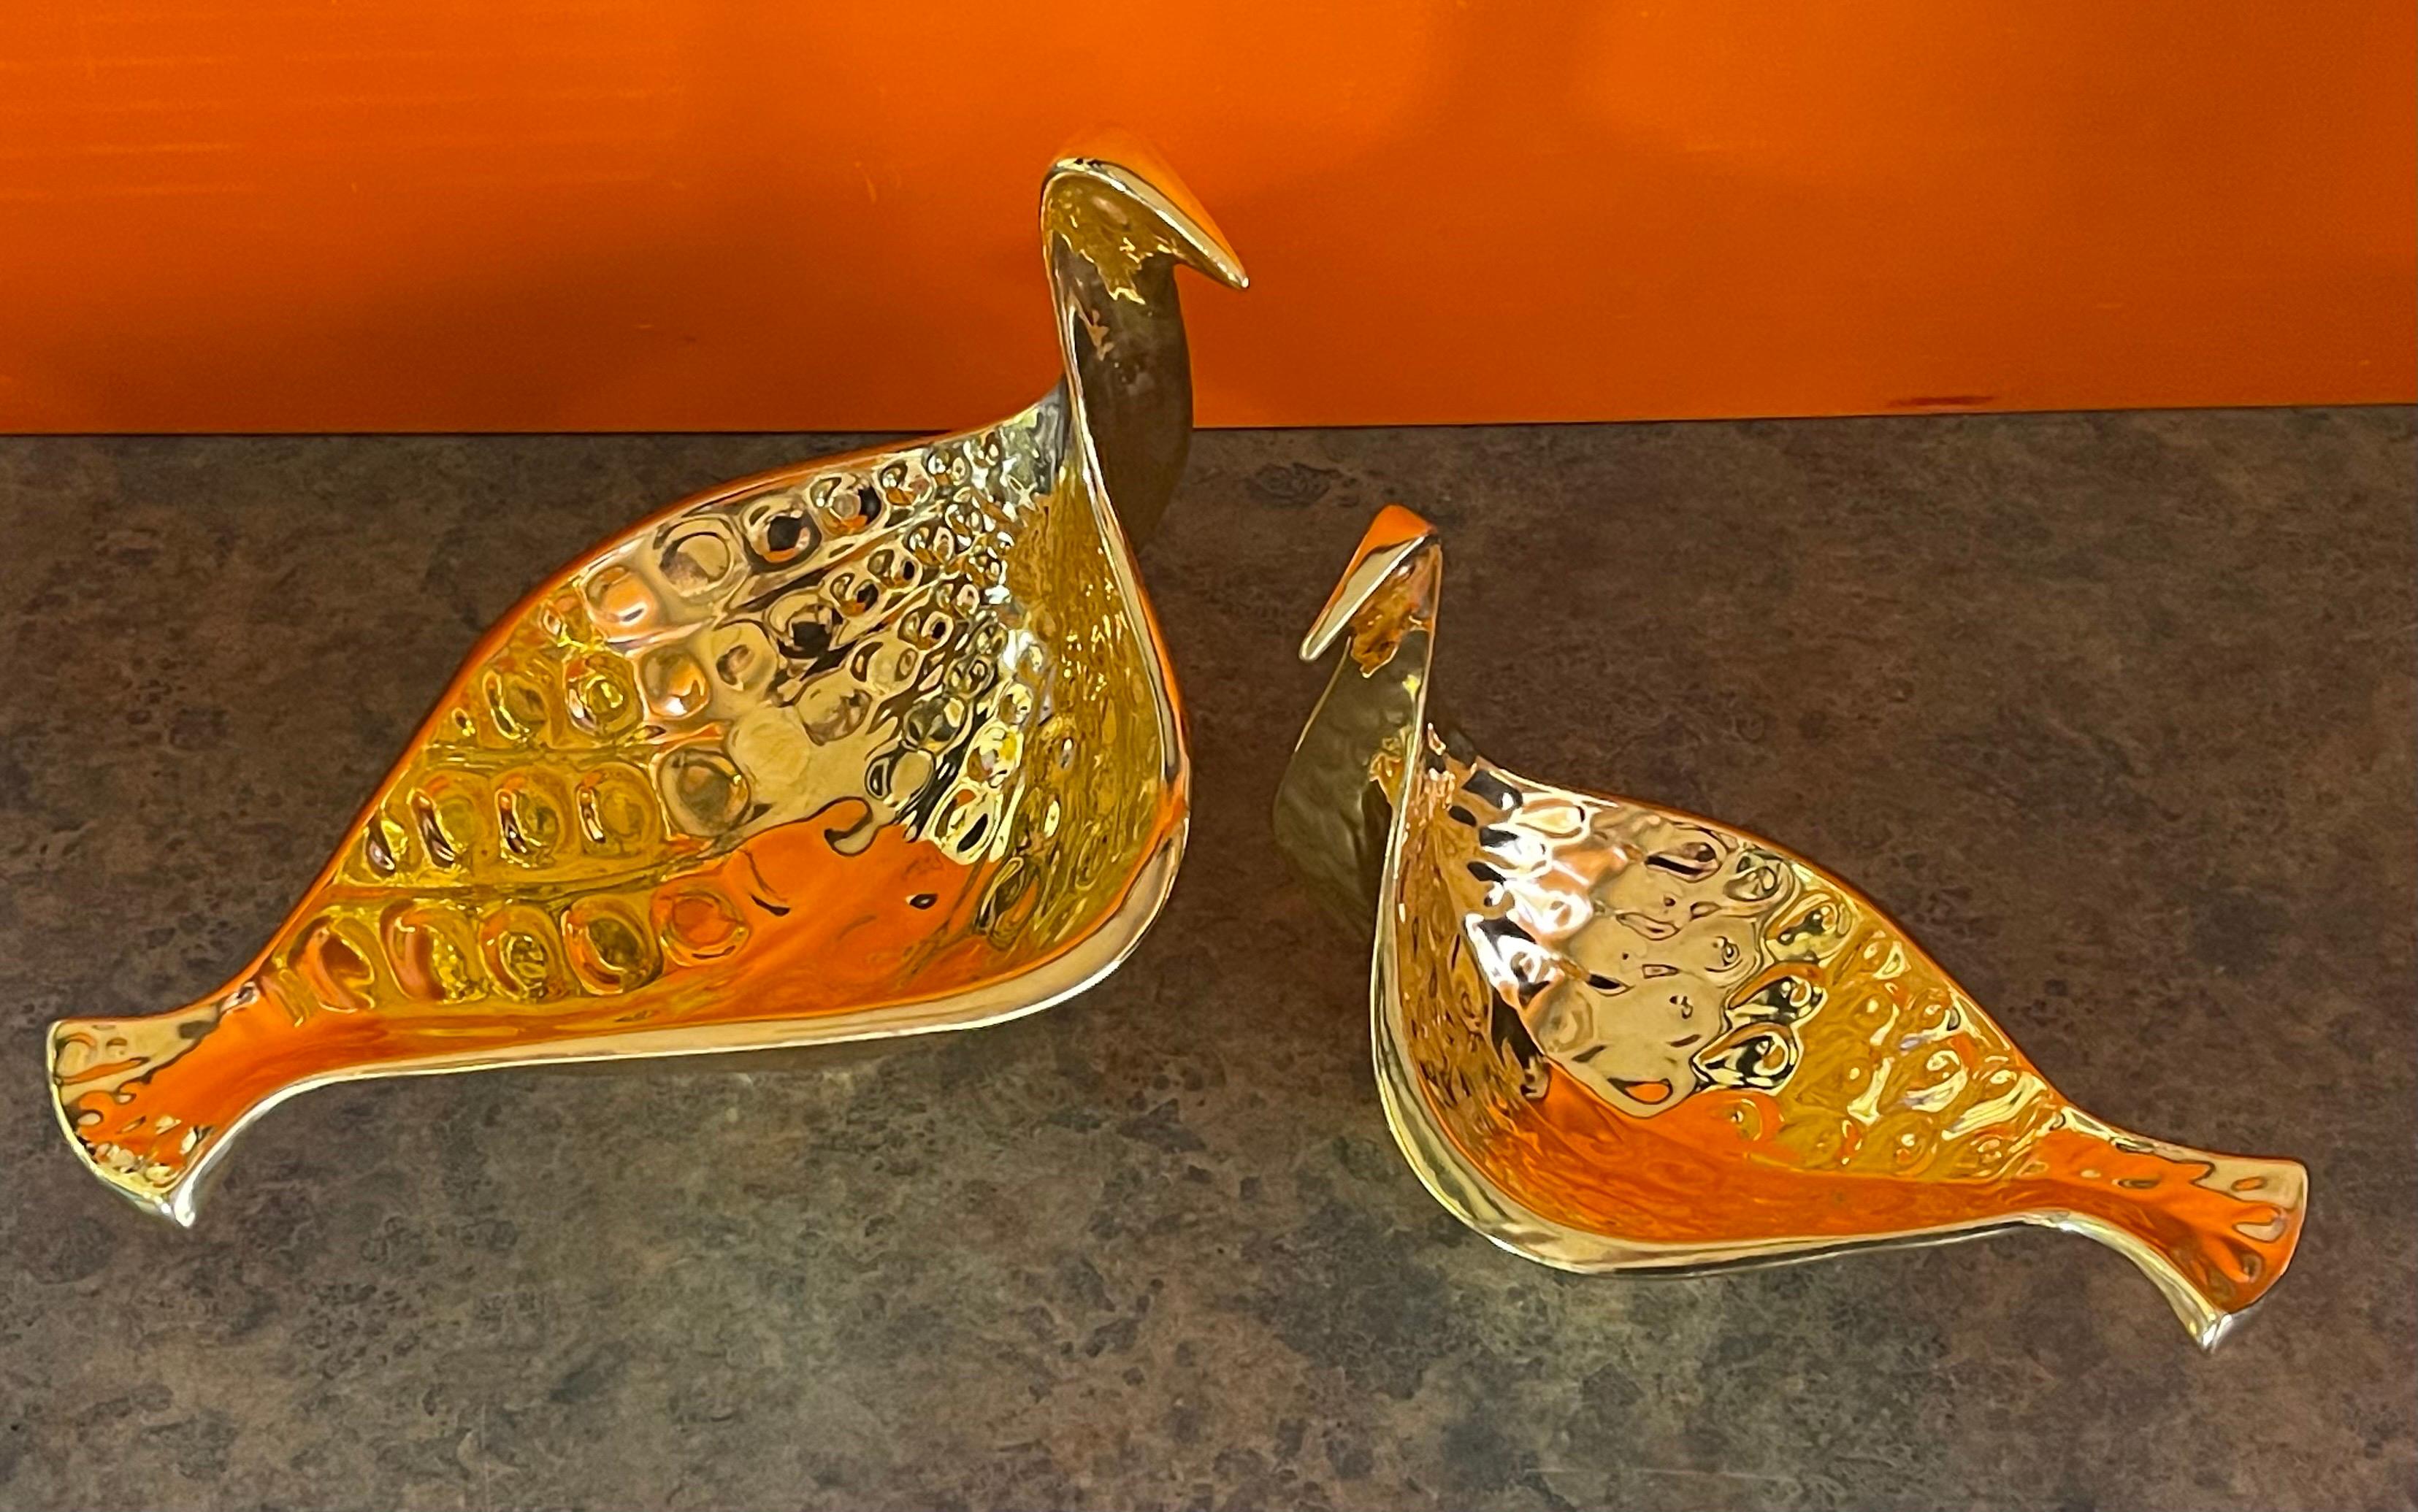 Pair of Gold Ceramic Bird Bowls from